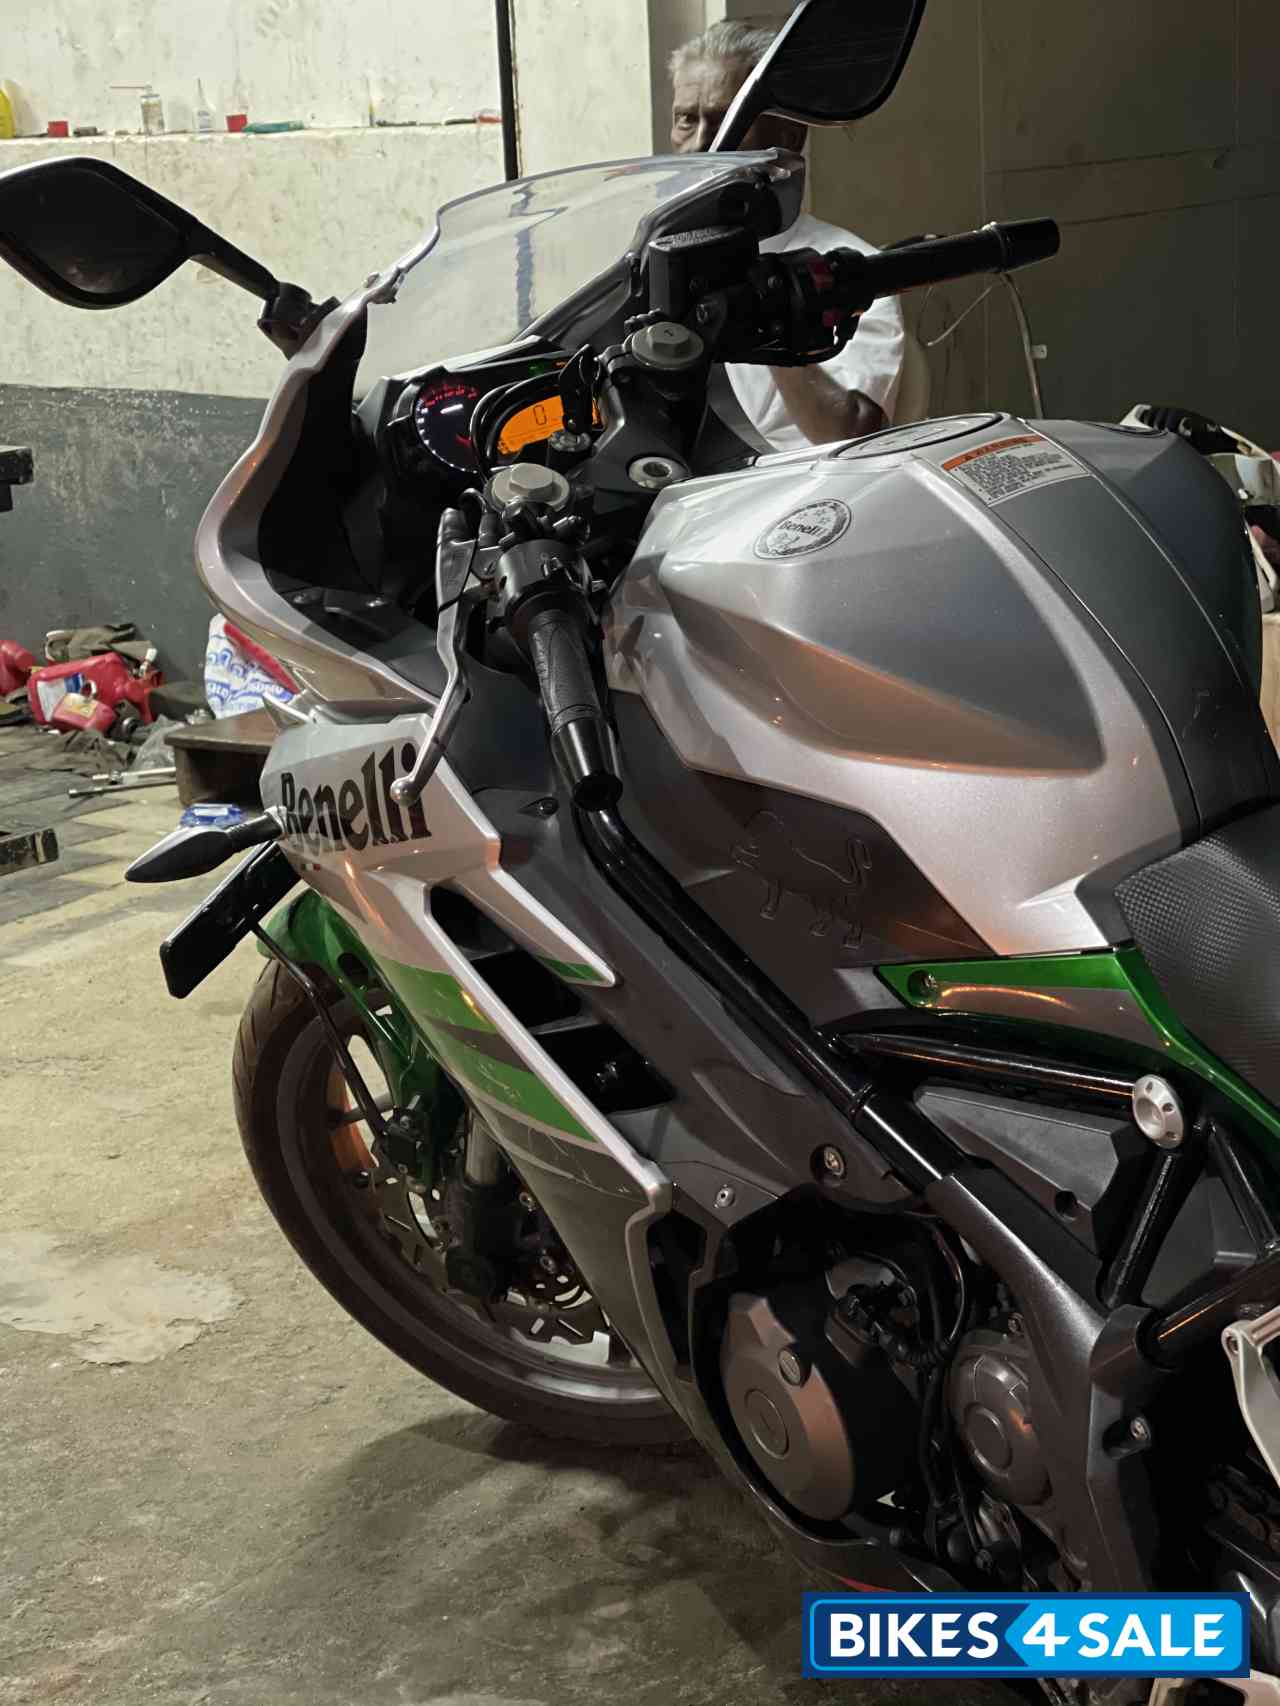 DSK Benelli 302R launched at Rs 3.48 lakh - Autocar India